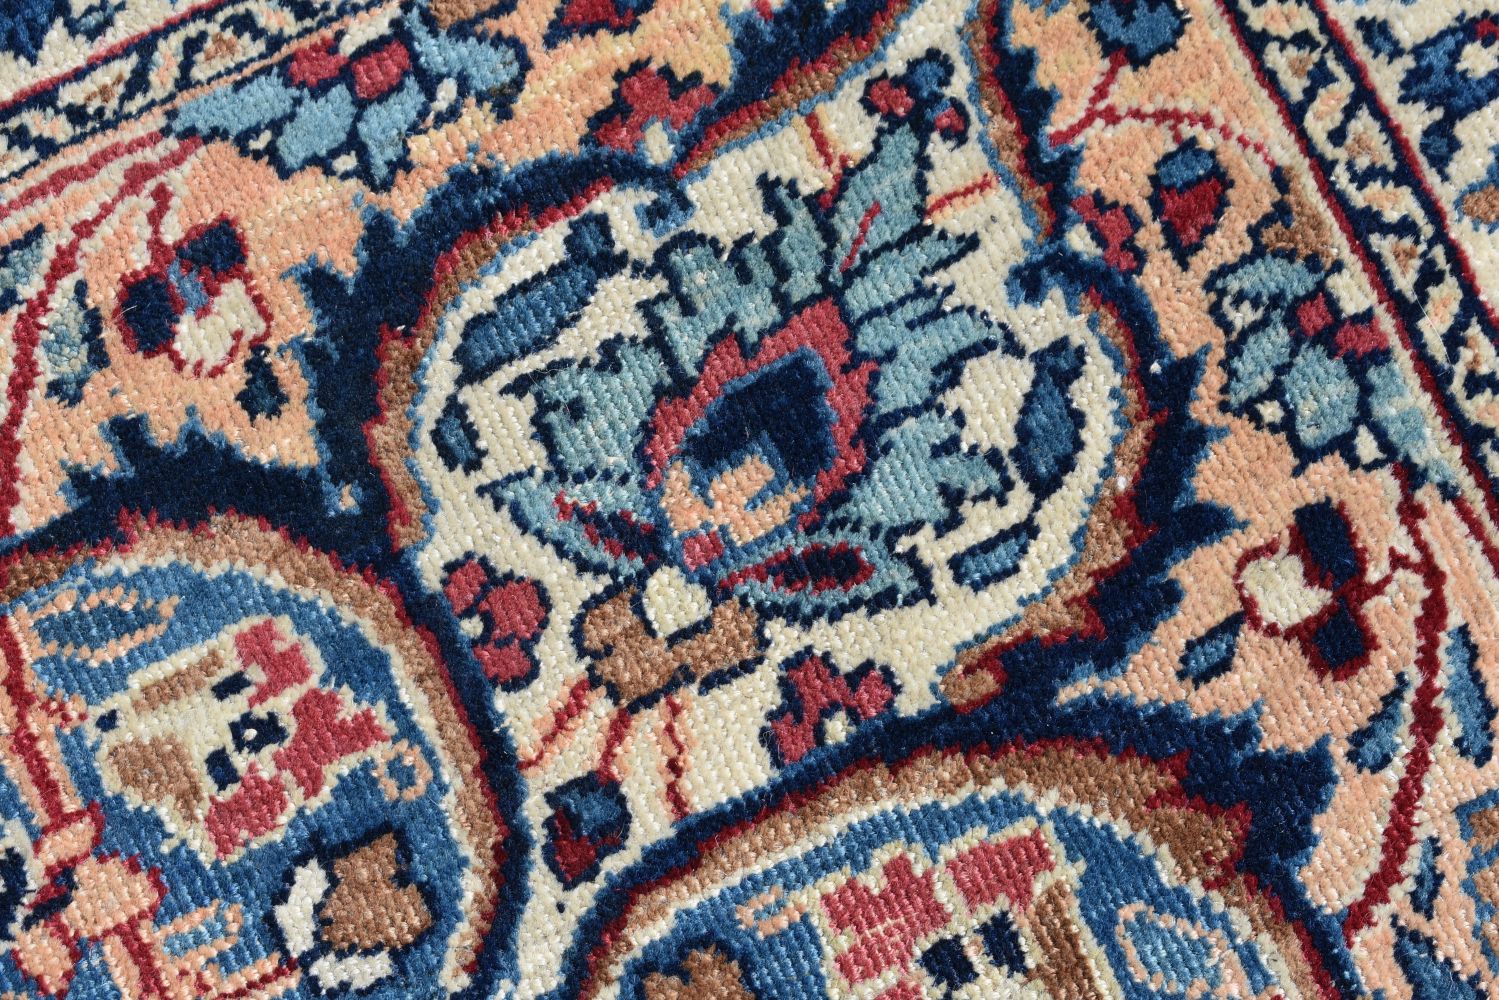 A Persian rug 189 x 122 cm - Image 14 of 14